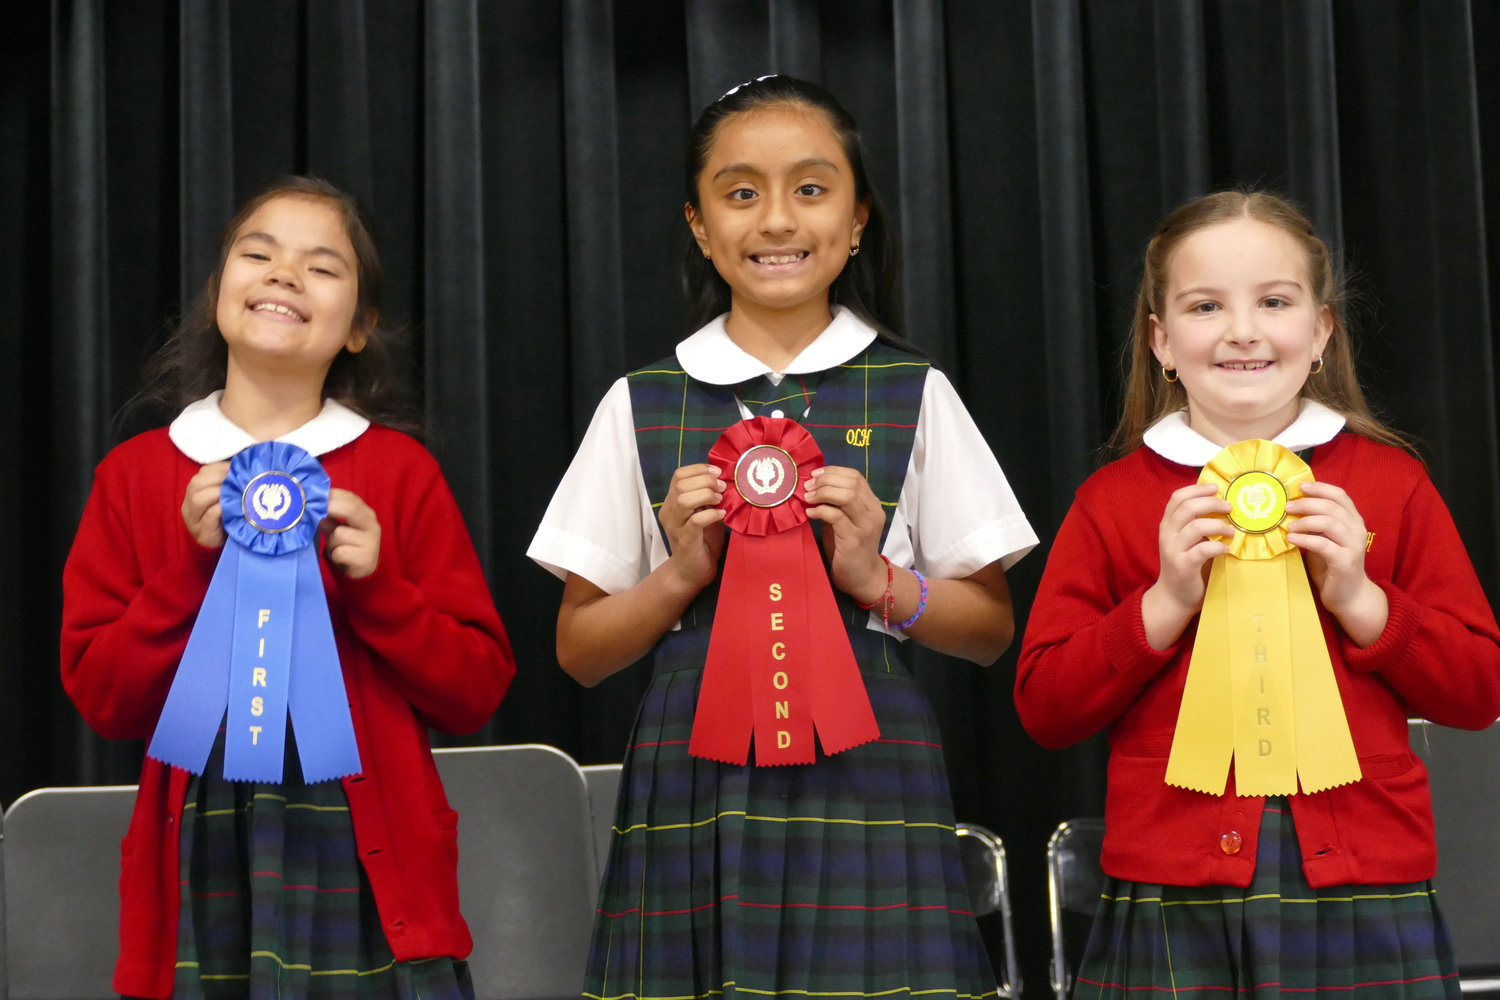 Our Lady of the Hamptons School students, from left, Michelle Rojas, Ahani Velecela and Kennedy McGhee with their spelling awards. COURTESY OUR LADY OF THE HAMPTONS SCHOOL